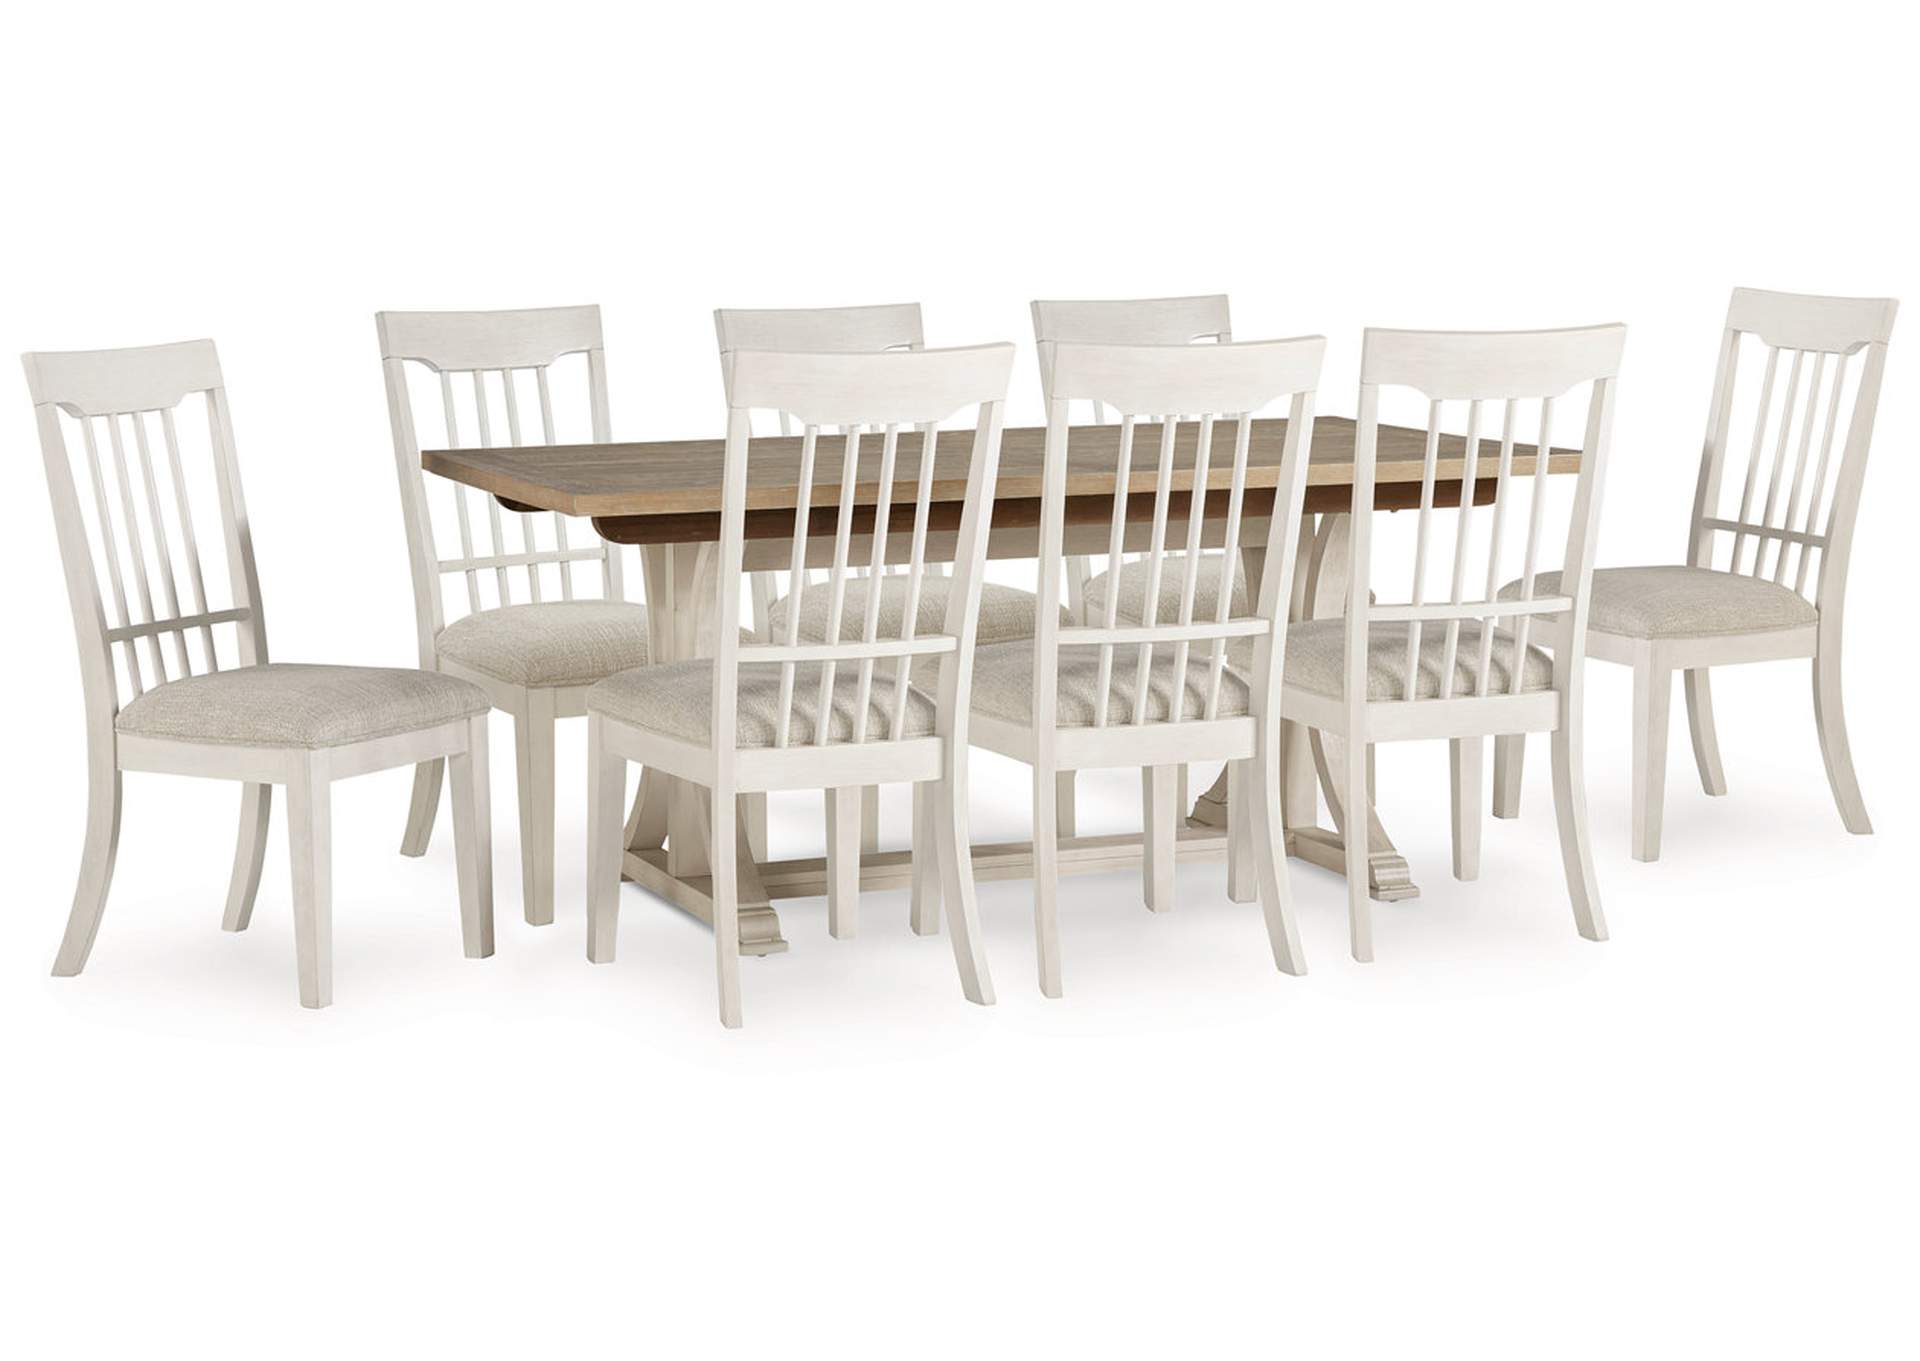 Shaybrock Dining Table and 8 Chairs,Benchcraft